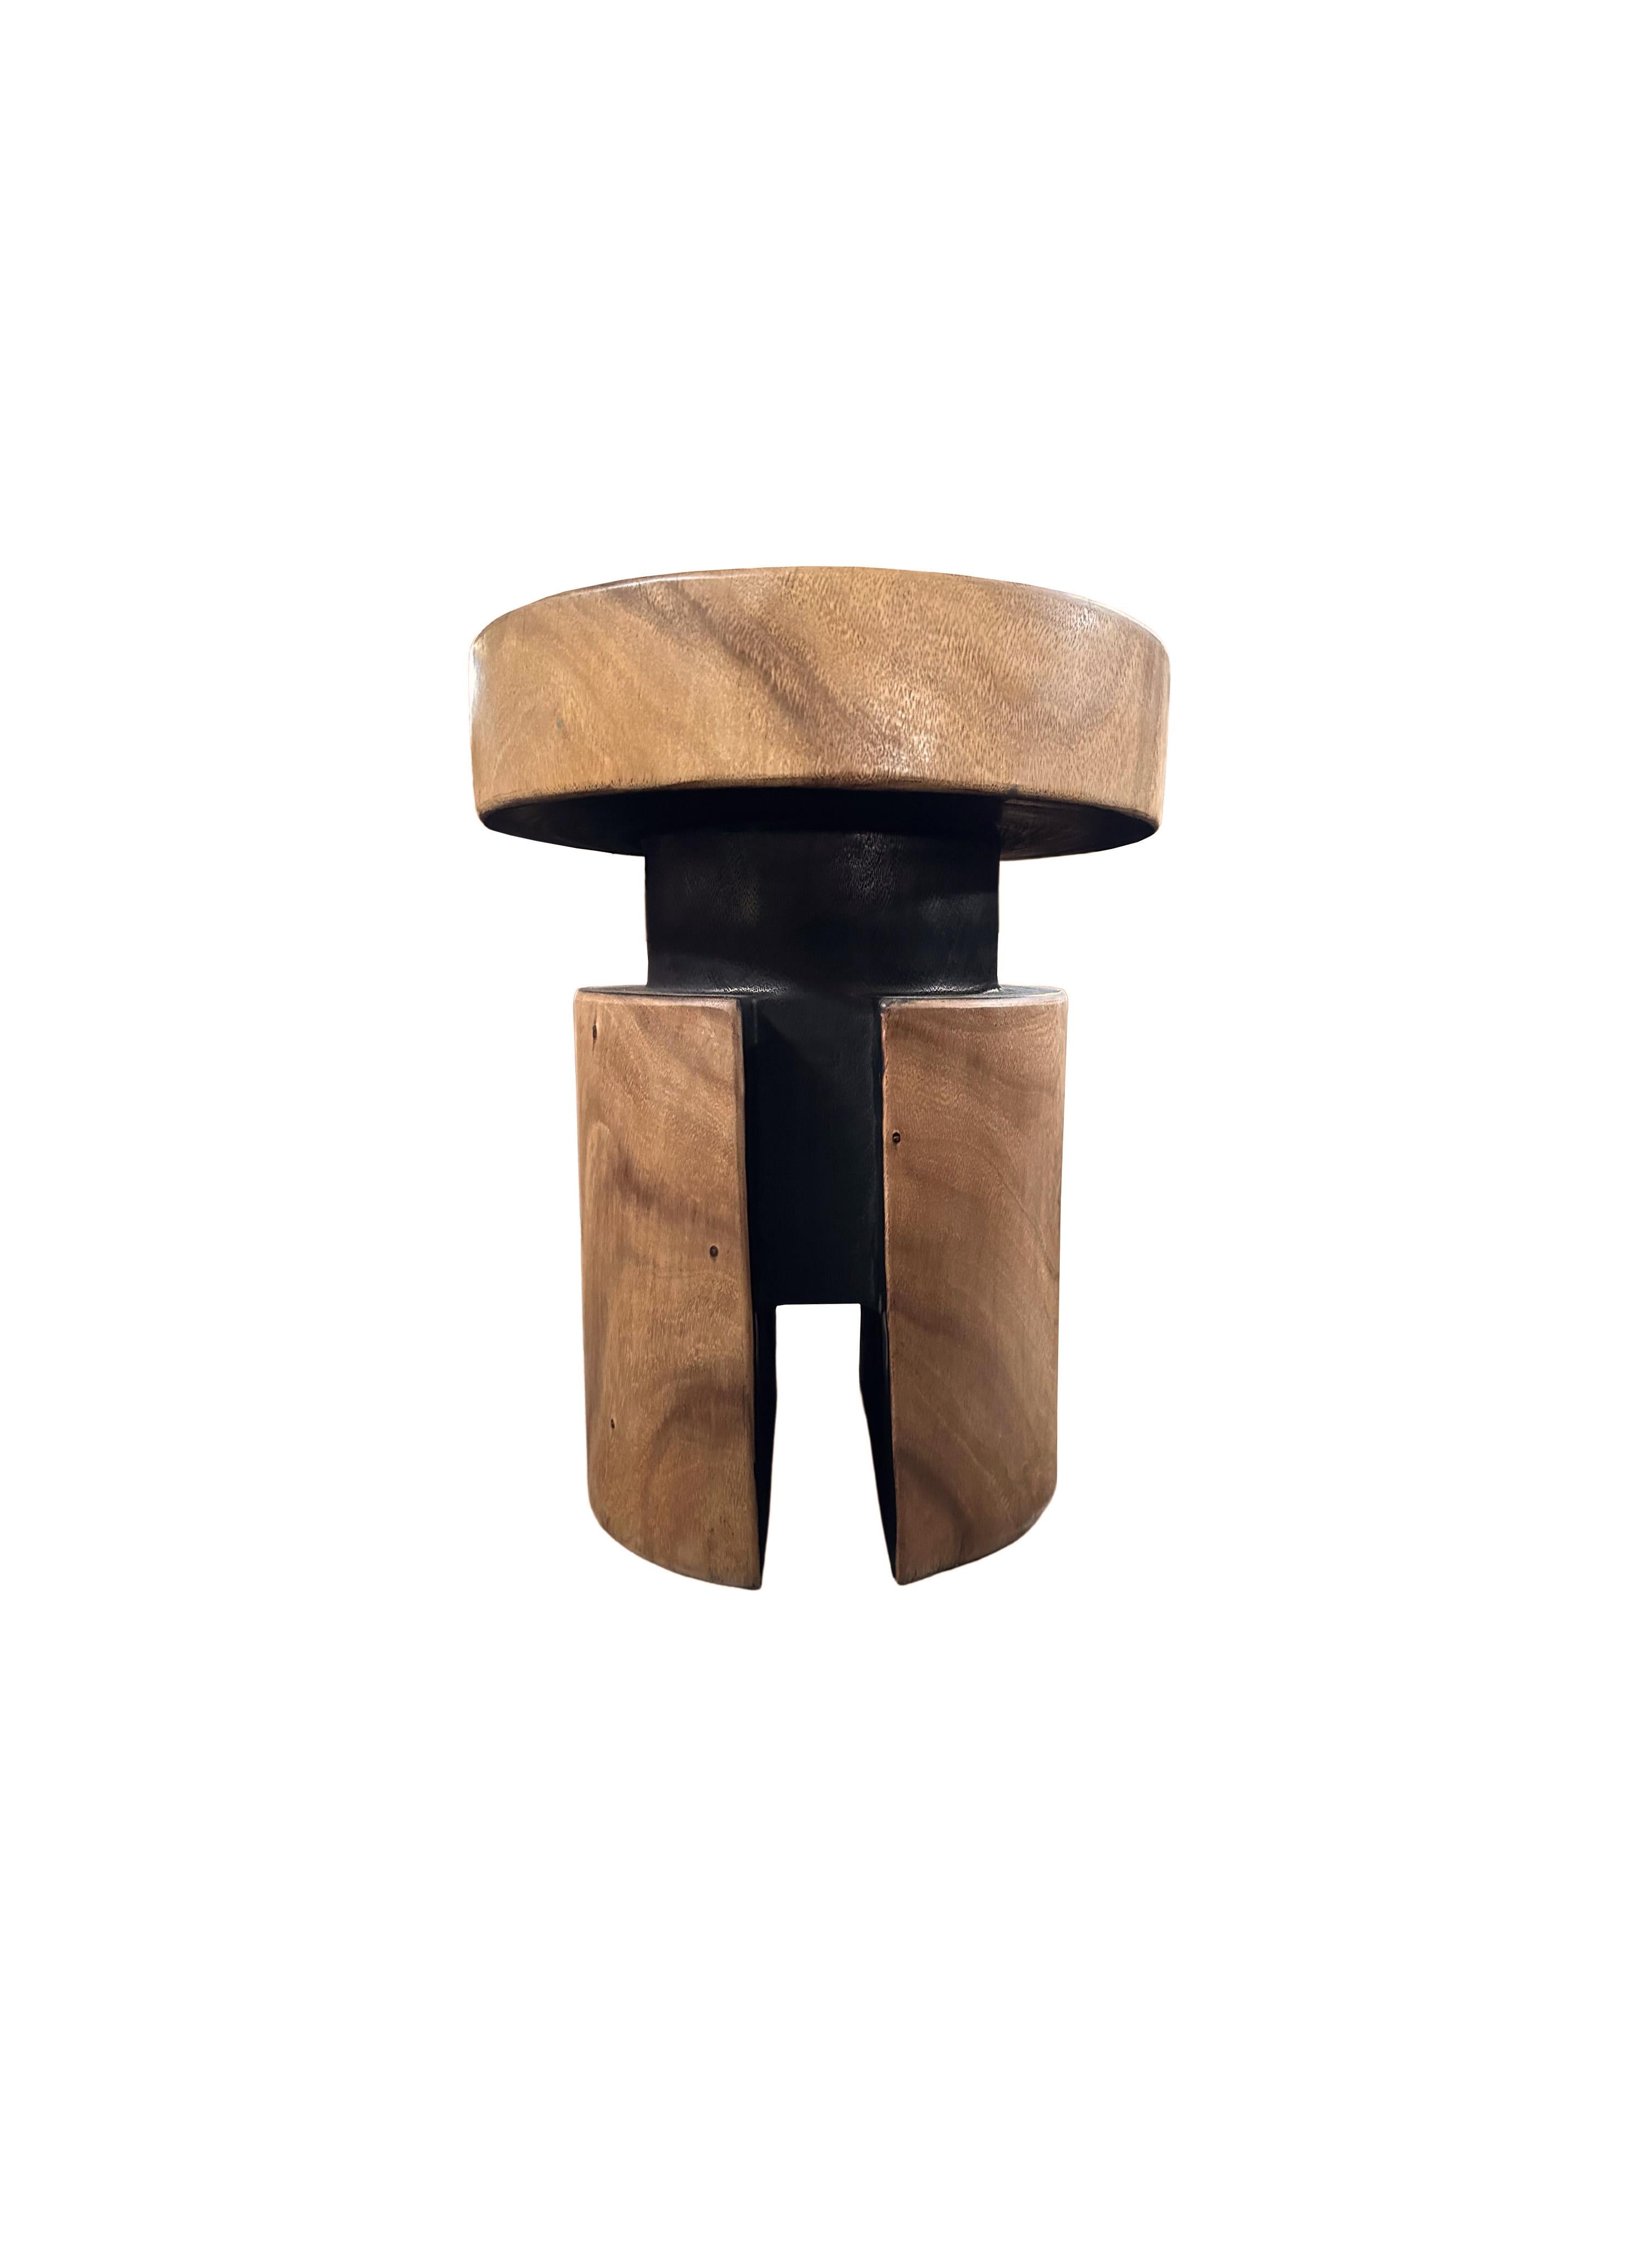 Indonesian Sculptural Suar Wood Side Table, with Stunning Wood Textures, Modern Organic For Sale